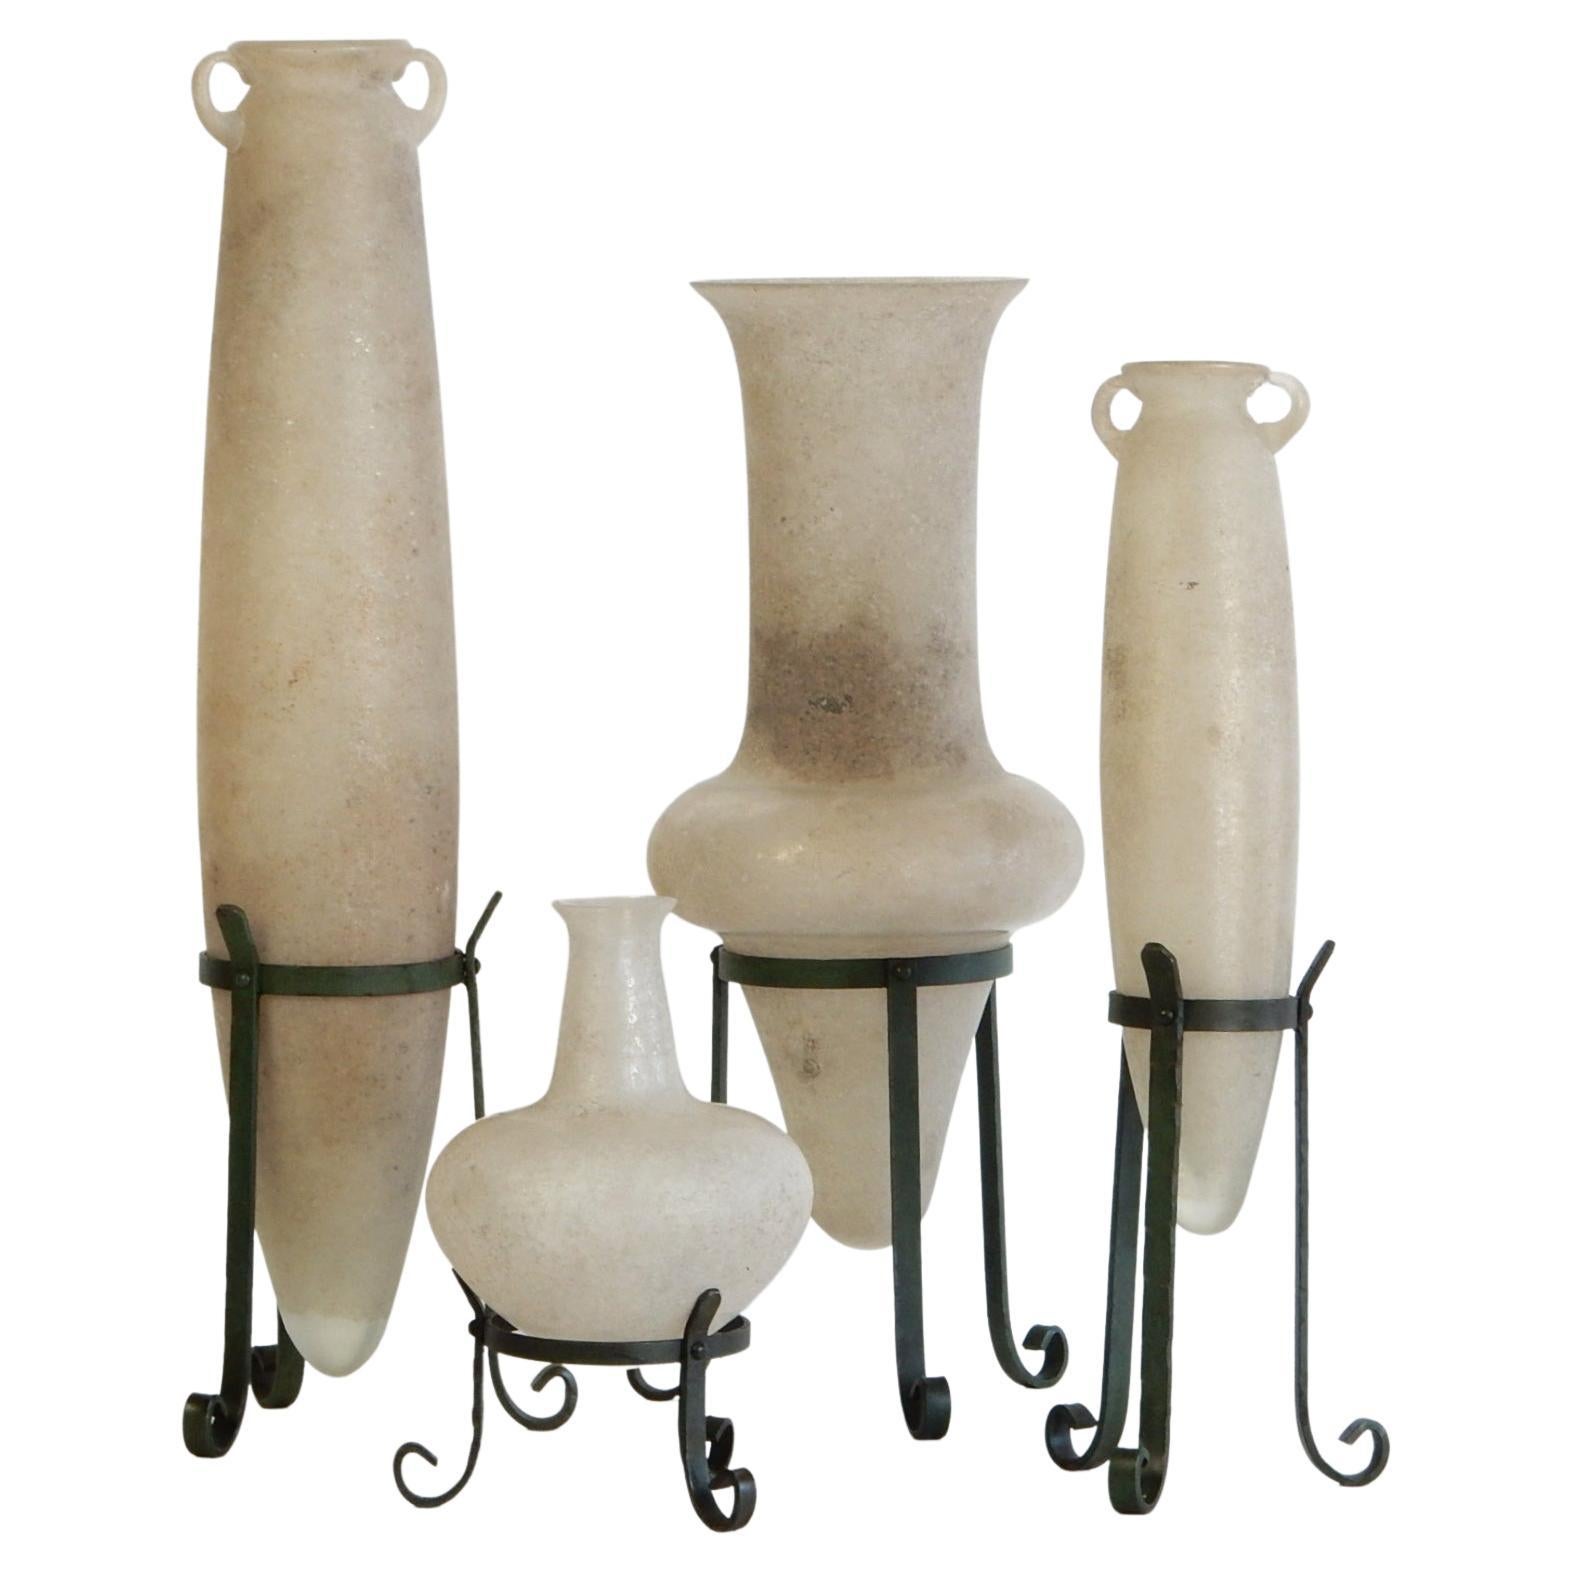 Monumental sized set of 1970's 'a Scavo' art glass vases attributed to Seguso Vetri d'Arte Murano, Italy.
Elegant old world forms showing extraordinary craftsmanship in the 'Scavo' technique to replicate the look and feel of ancient Roman